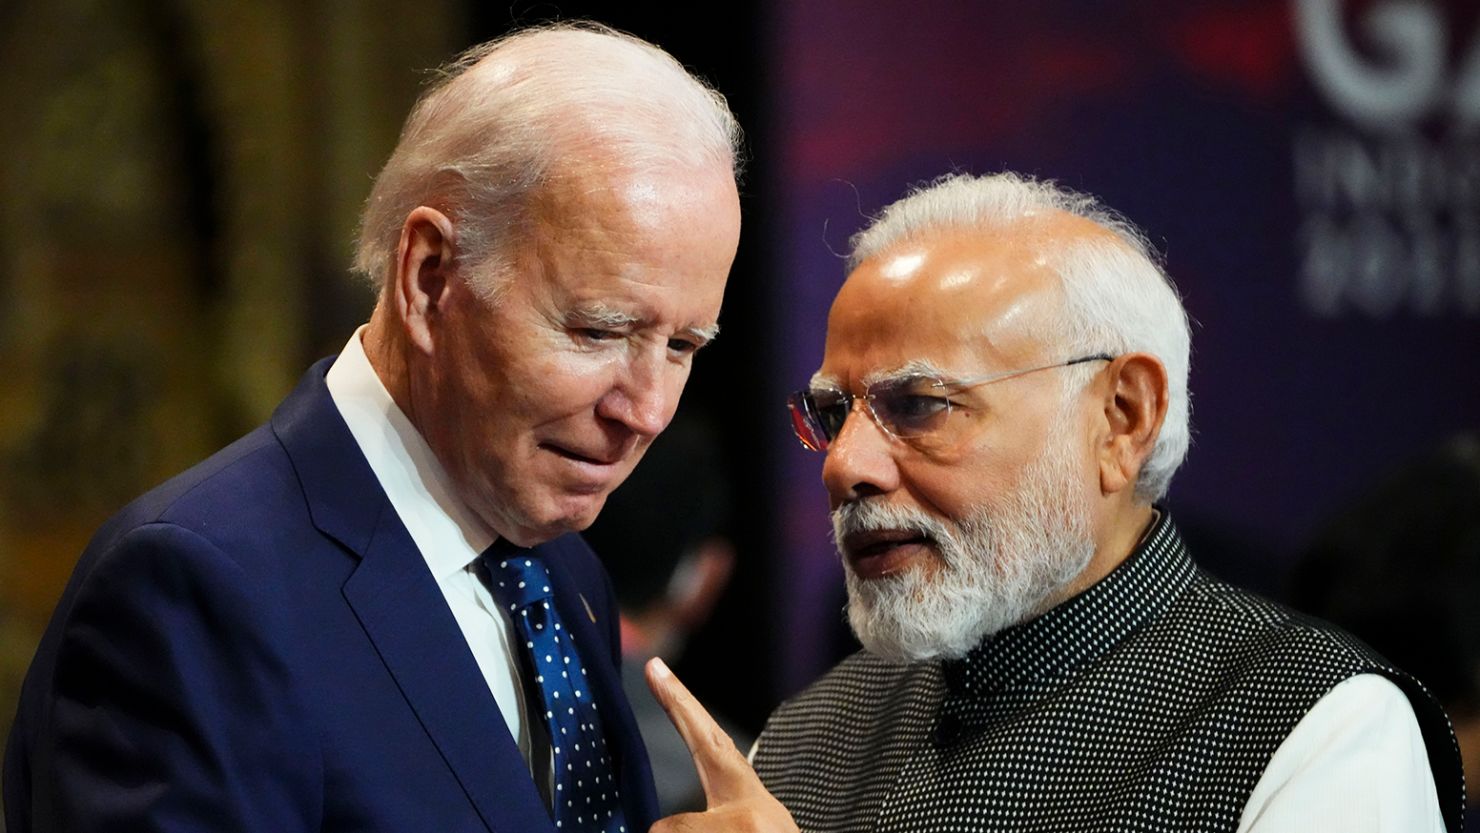 India's Prime Minister Narendra Modi talks with US President Joe Biden as they arrive for the first working session of the G20 leaders summit in Bali, Indonesia, Nov. 15, 2022.